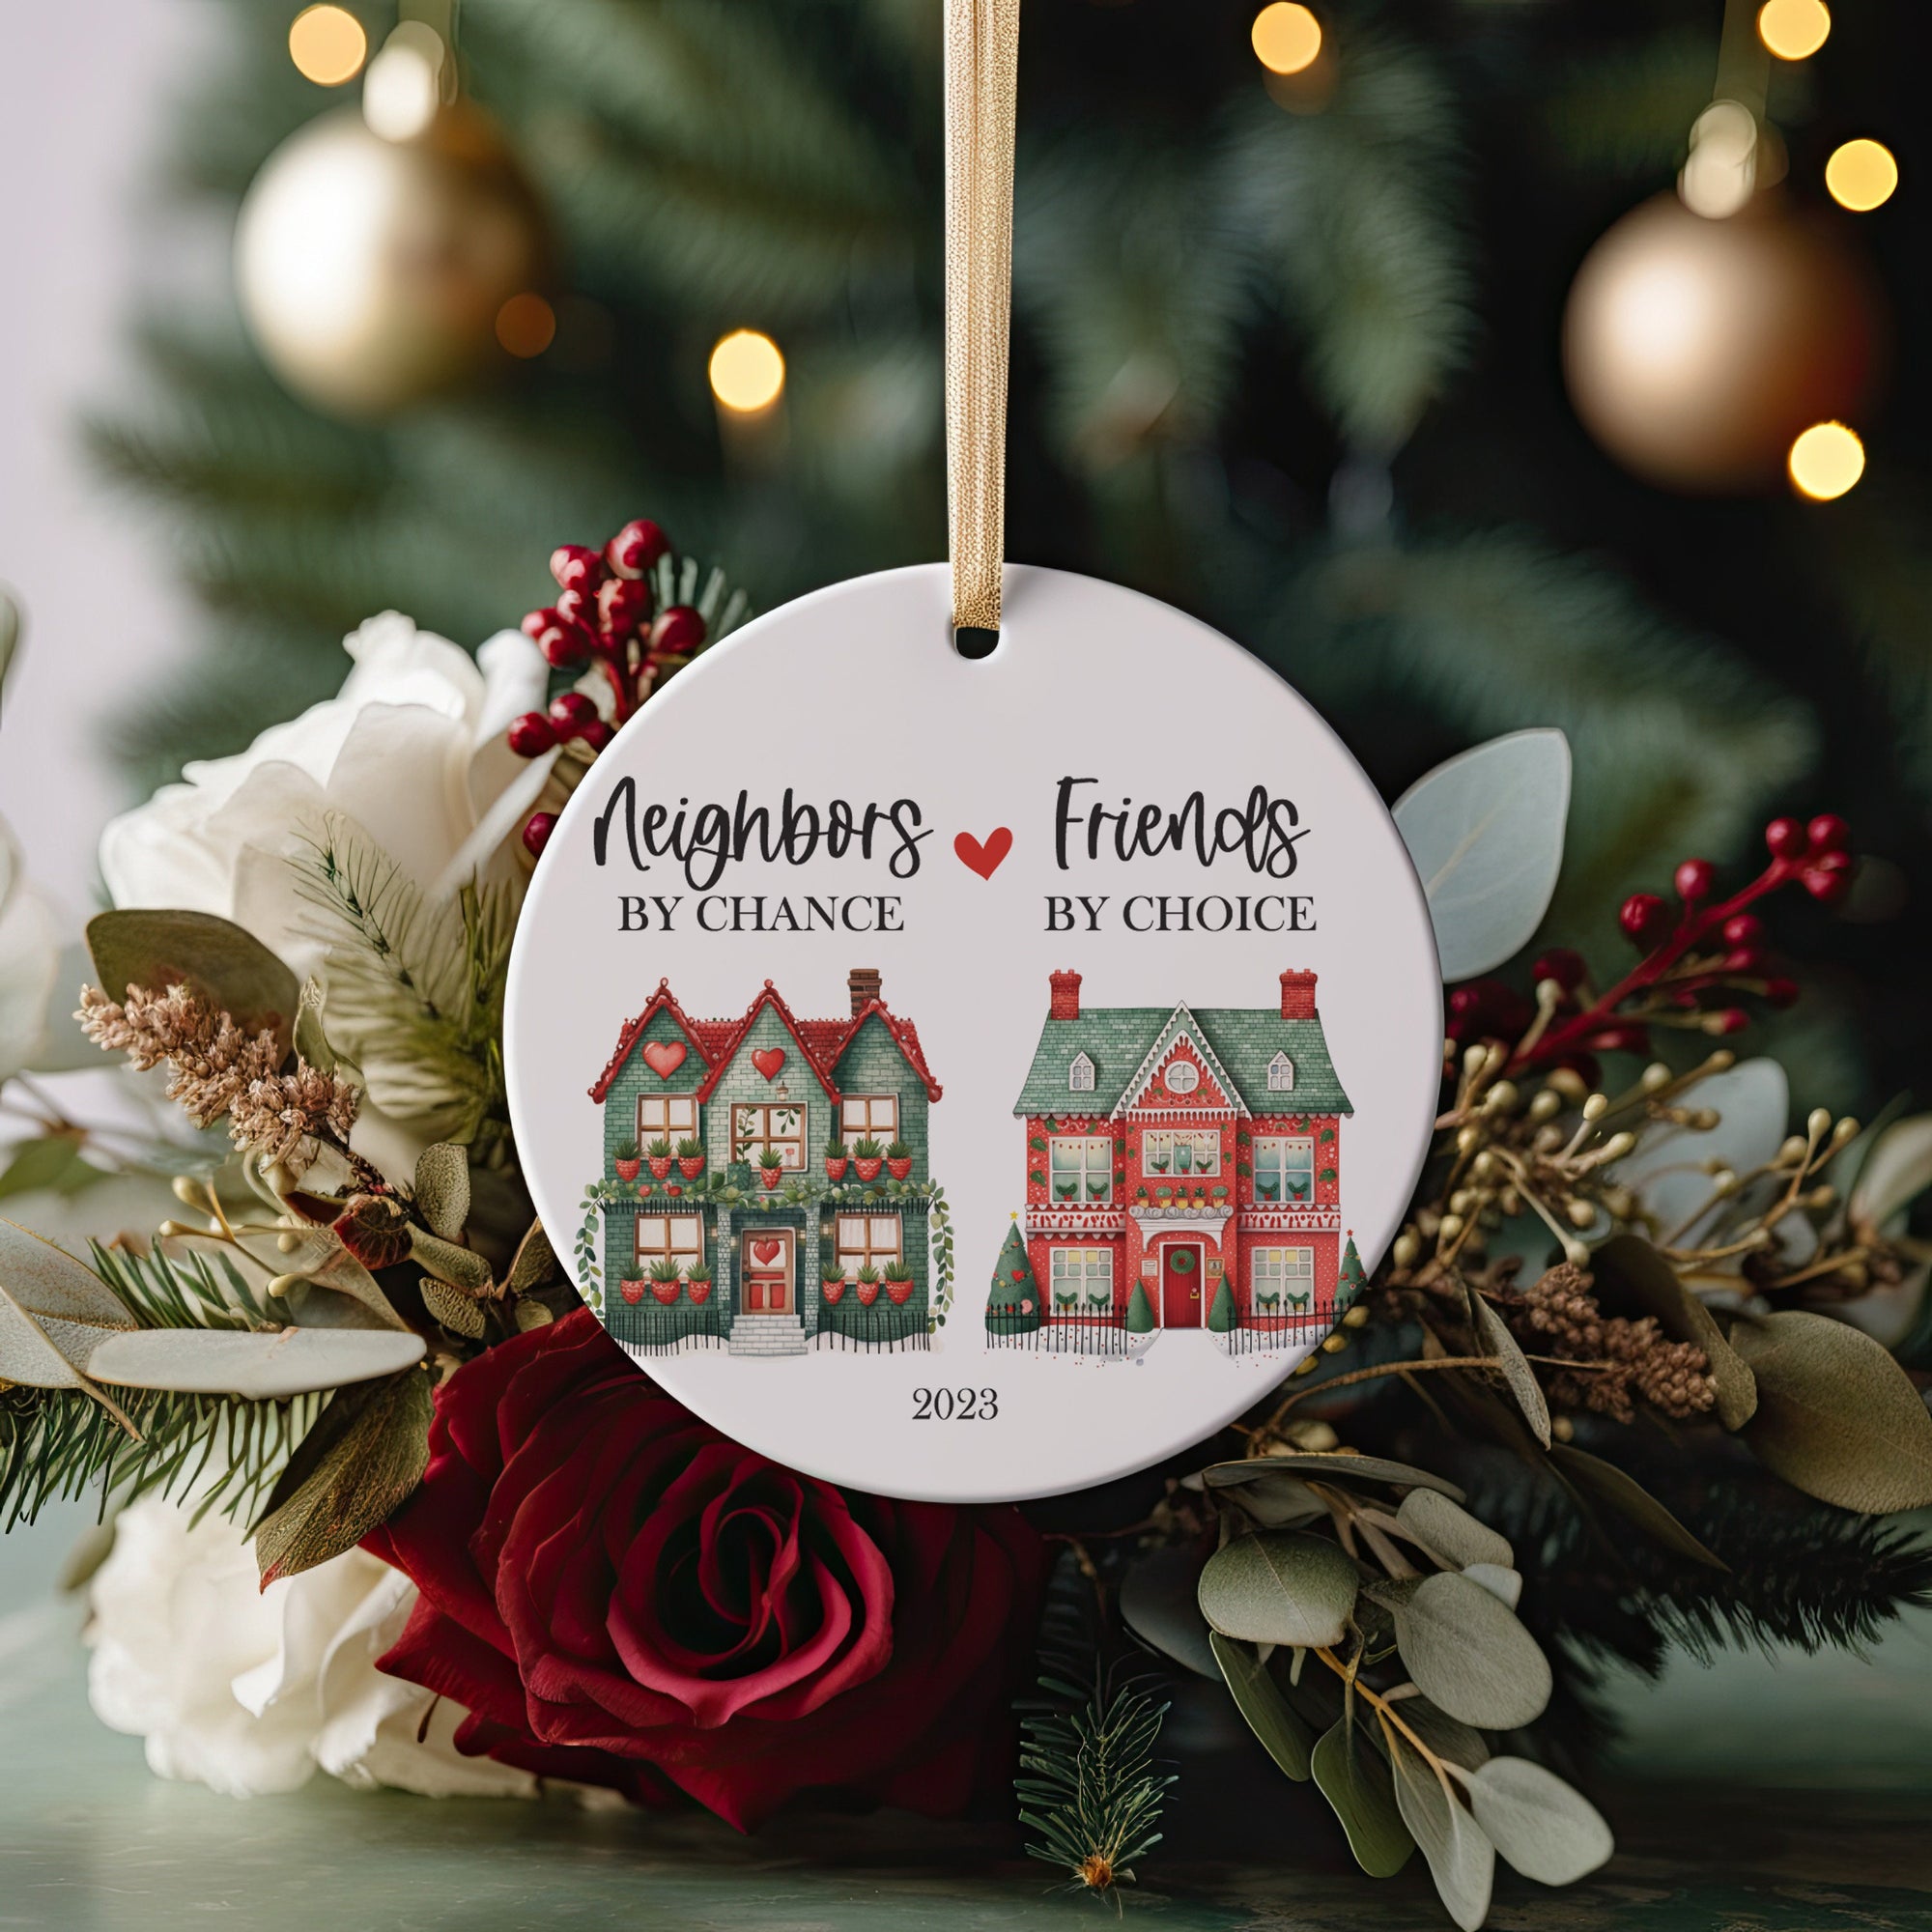 Neighbors by Chance, Friends by Choice Christmas Ceramic Round Ornament Present Idea for Best Neighborhood Friends, with Ribbon + Gift Box